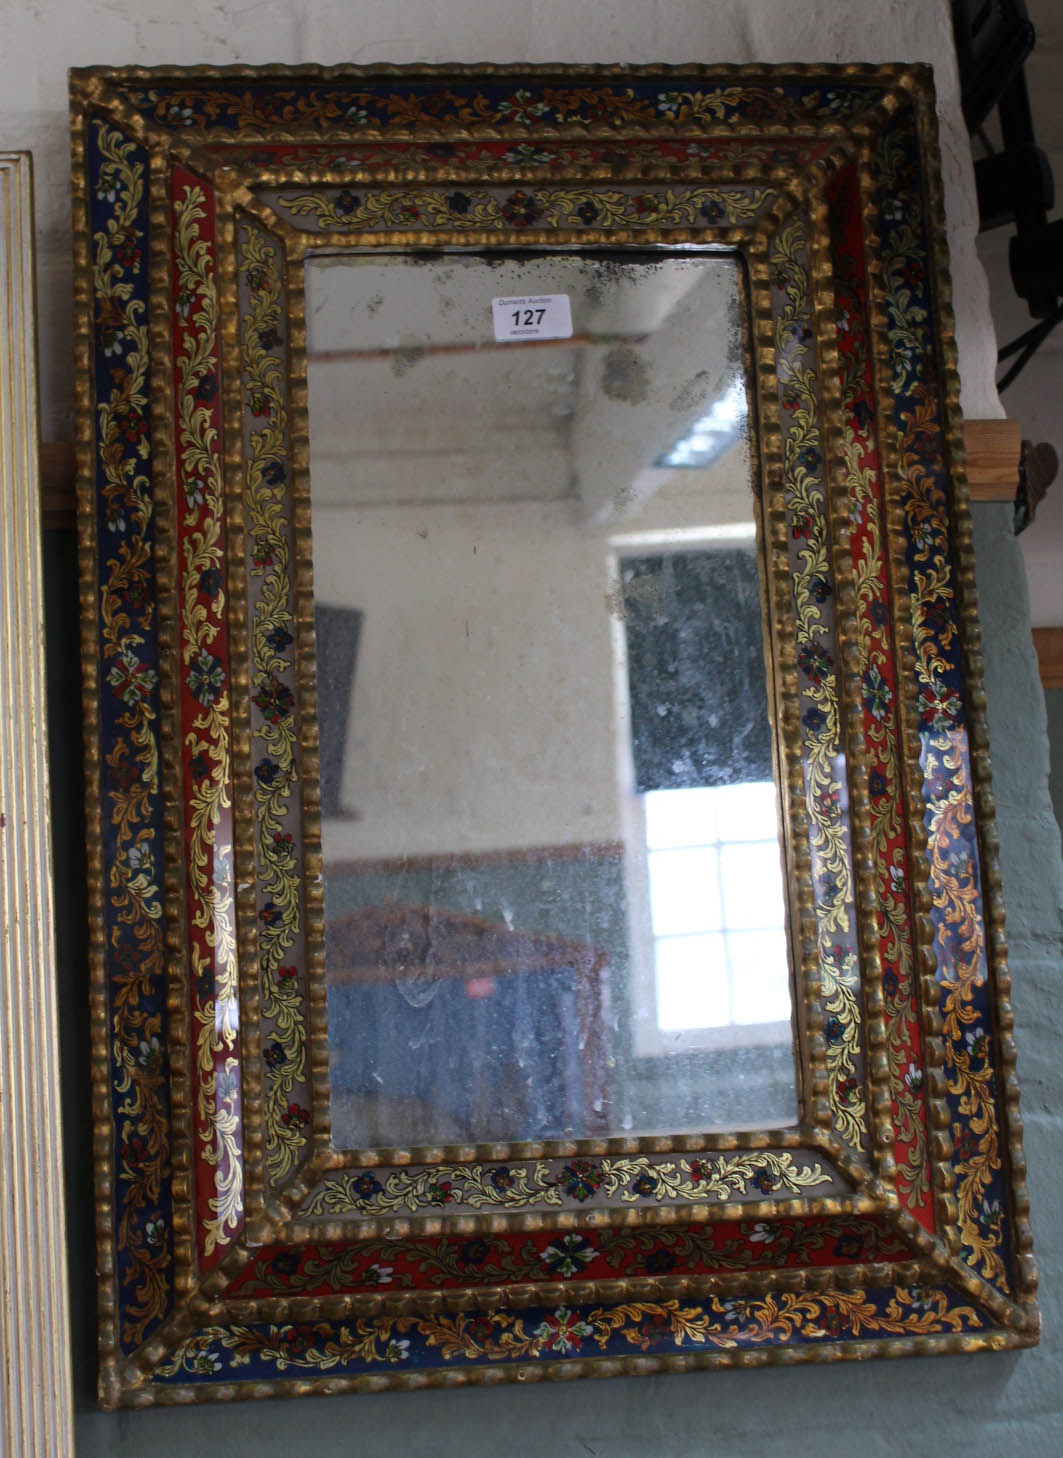 A Venetian mirror with gilt and floral glass panels